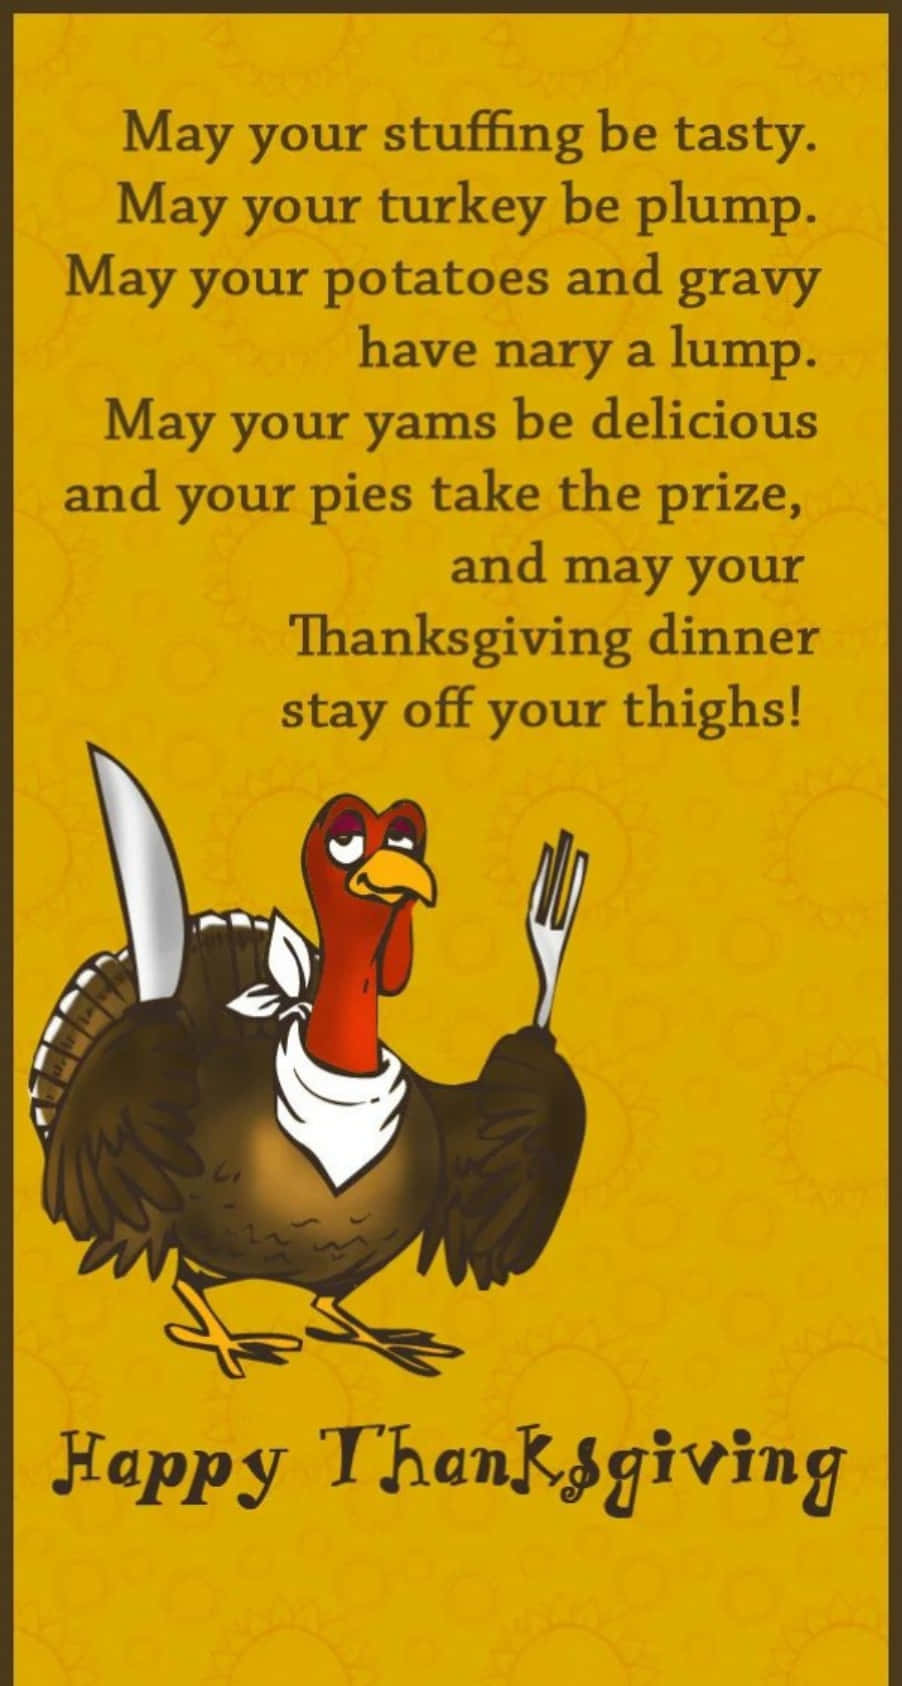 Give Thanks for Thanksgiving Fun!